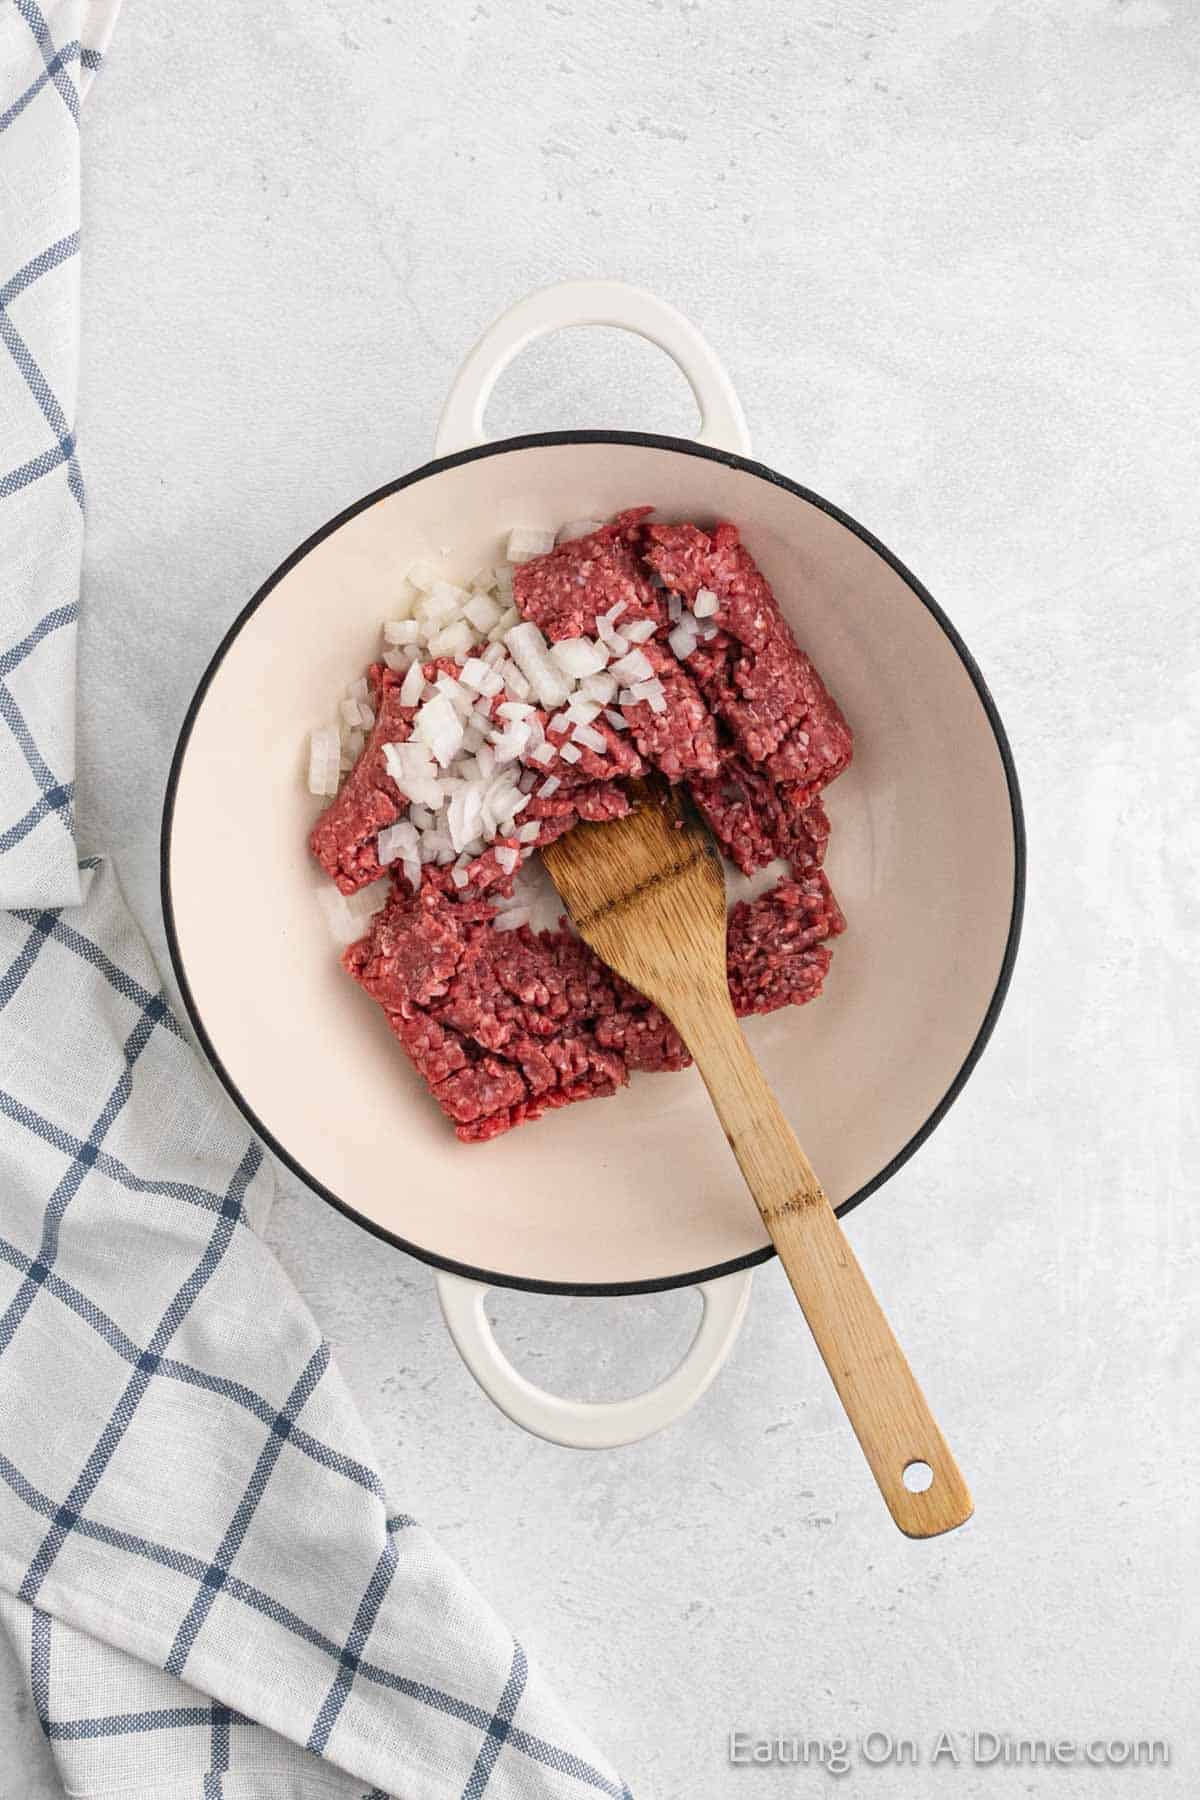 A white pot containing raw ground beef and chopped onions is placed on a light-colored countertop, ready to create a homemade Cheeseburger Helper. A wooden spatula rests inside the pot, while a white and blue checkered cloth is partly visible on the left side of the image.